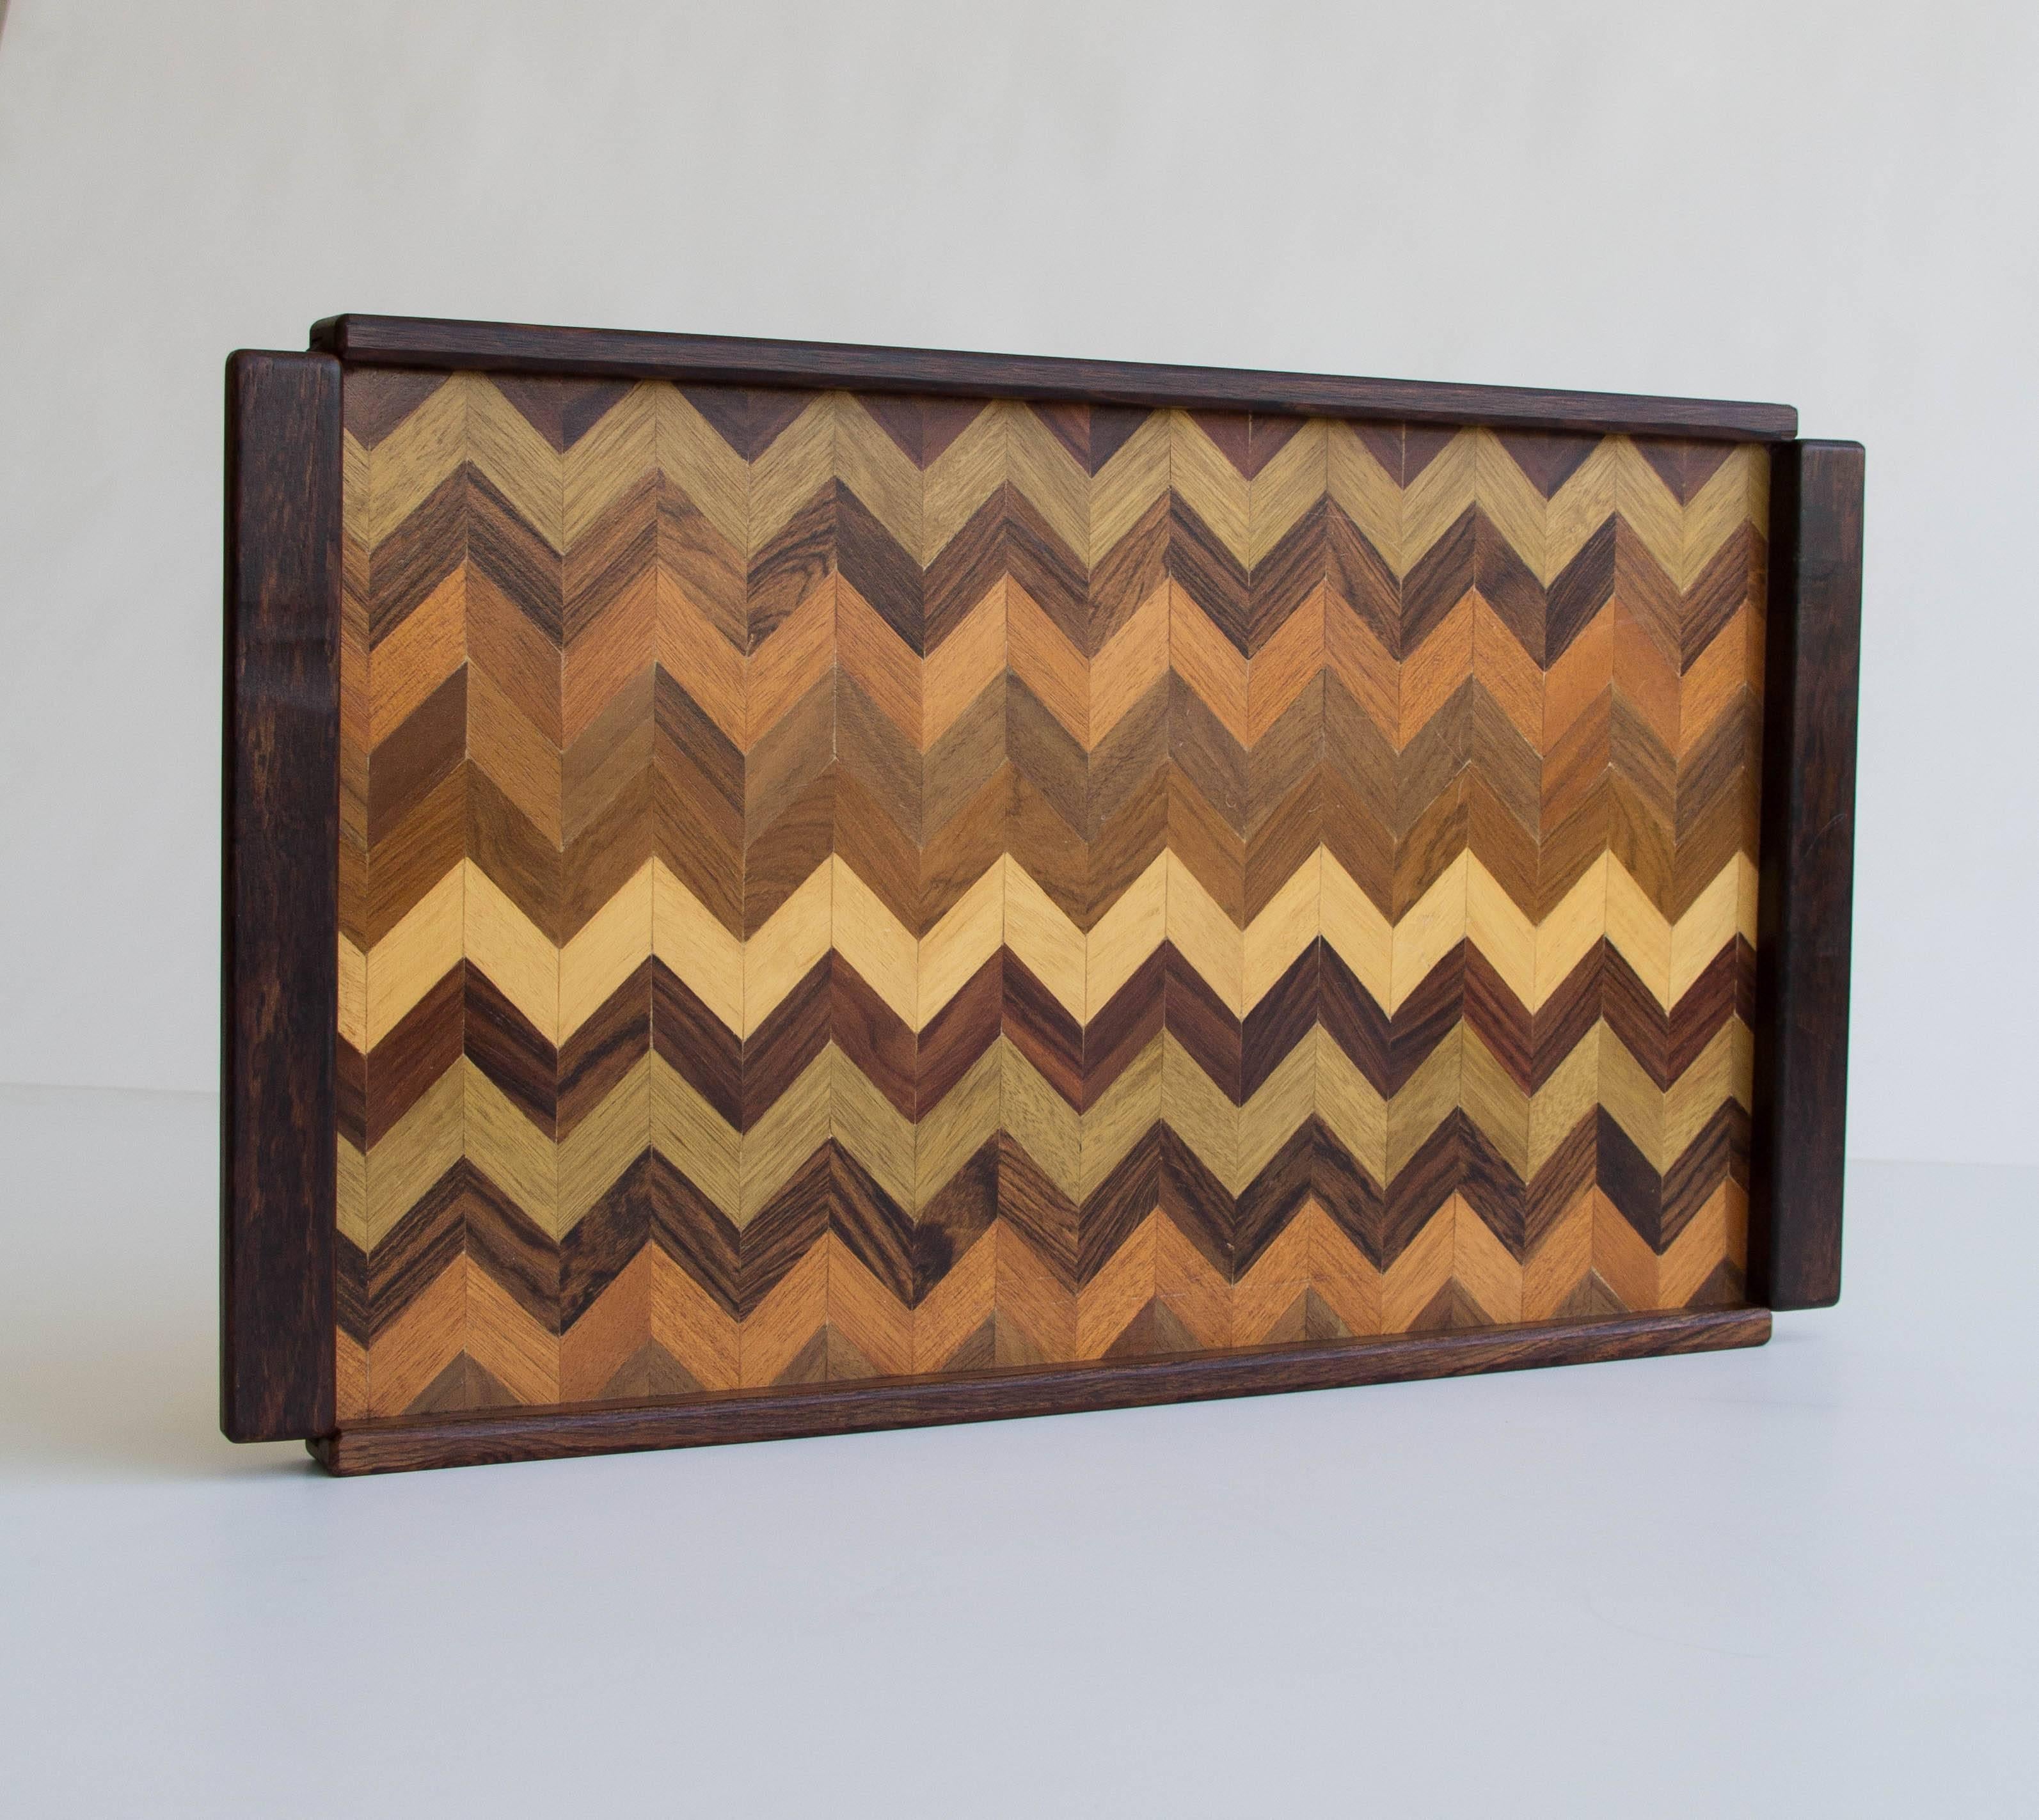 Rosewood serving tray by Don Shoemaker for his company Señal in the 1960s. The surface of the tray is has a chevron-patterned parquet detail in exotic woods. Label on bottom reads, “Designed by Don S. Shoemaker, Produced by Señal S.A., Sta. Ma. de